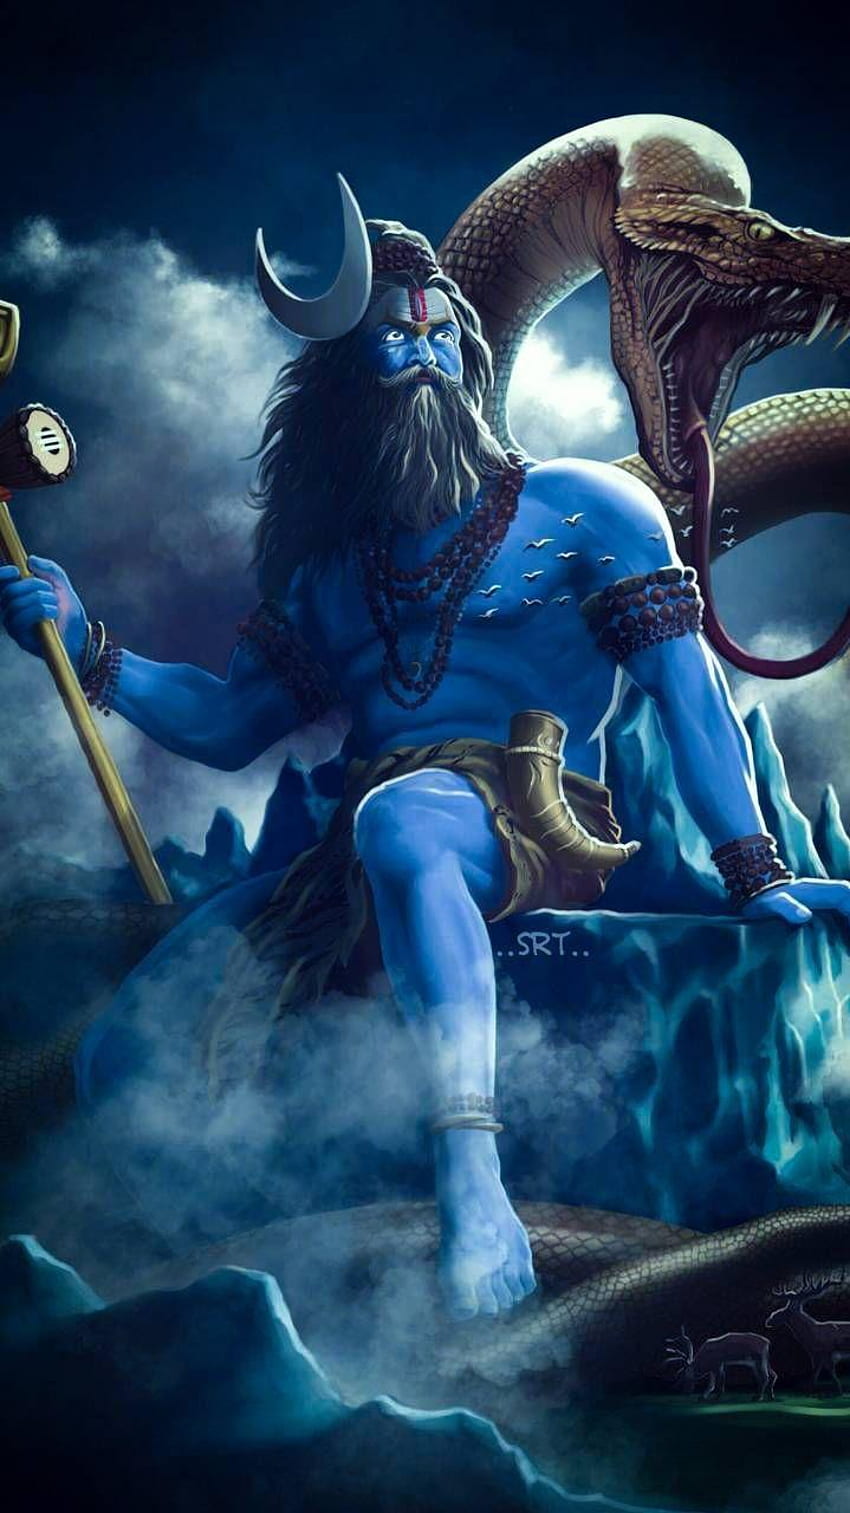 Best Collection of Lord Shiva Wallpapers For Your Mobile Phone  Lord shiva  hd wallpaper Shiva lord wallpapers Lord shiva